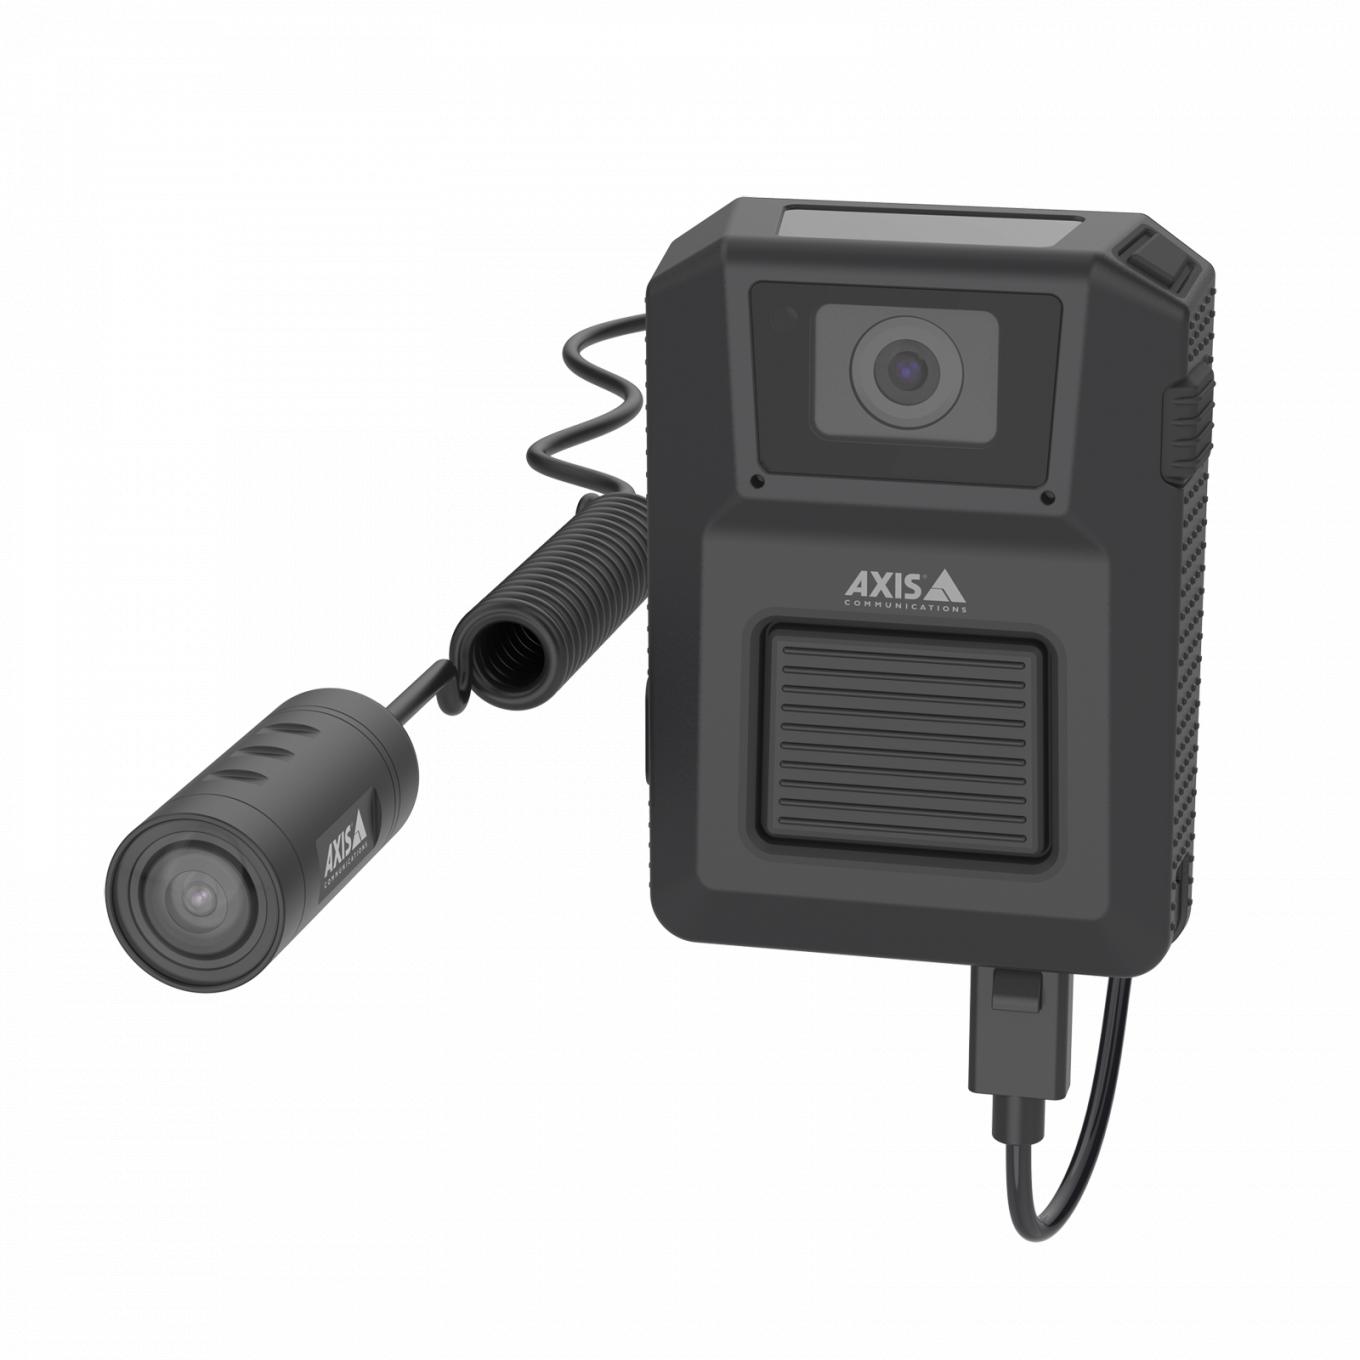 AXIS TW1200 Body Worn Bullet Sensor with camera from the left angle